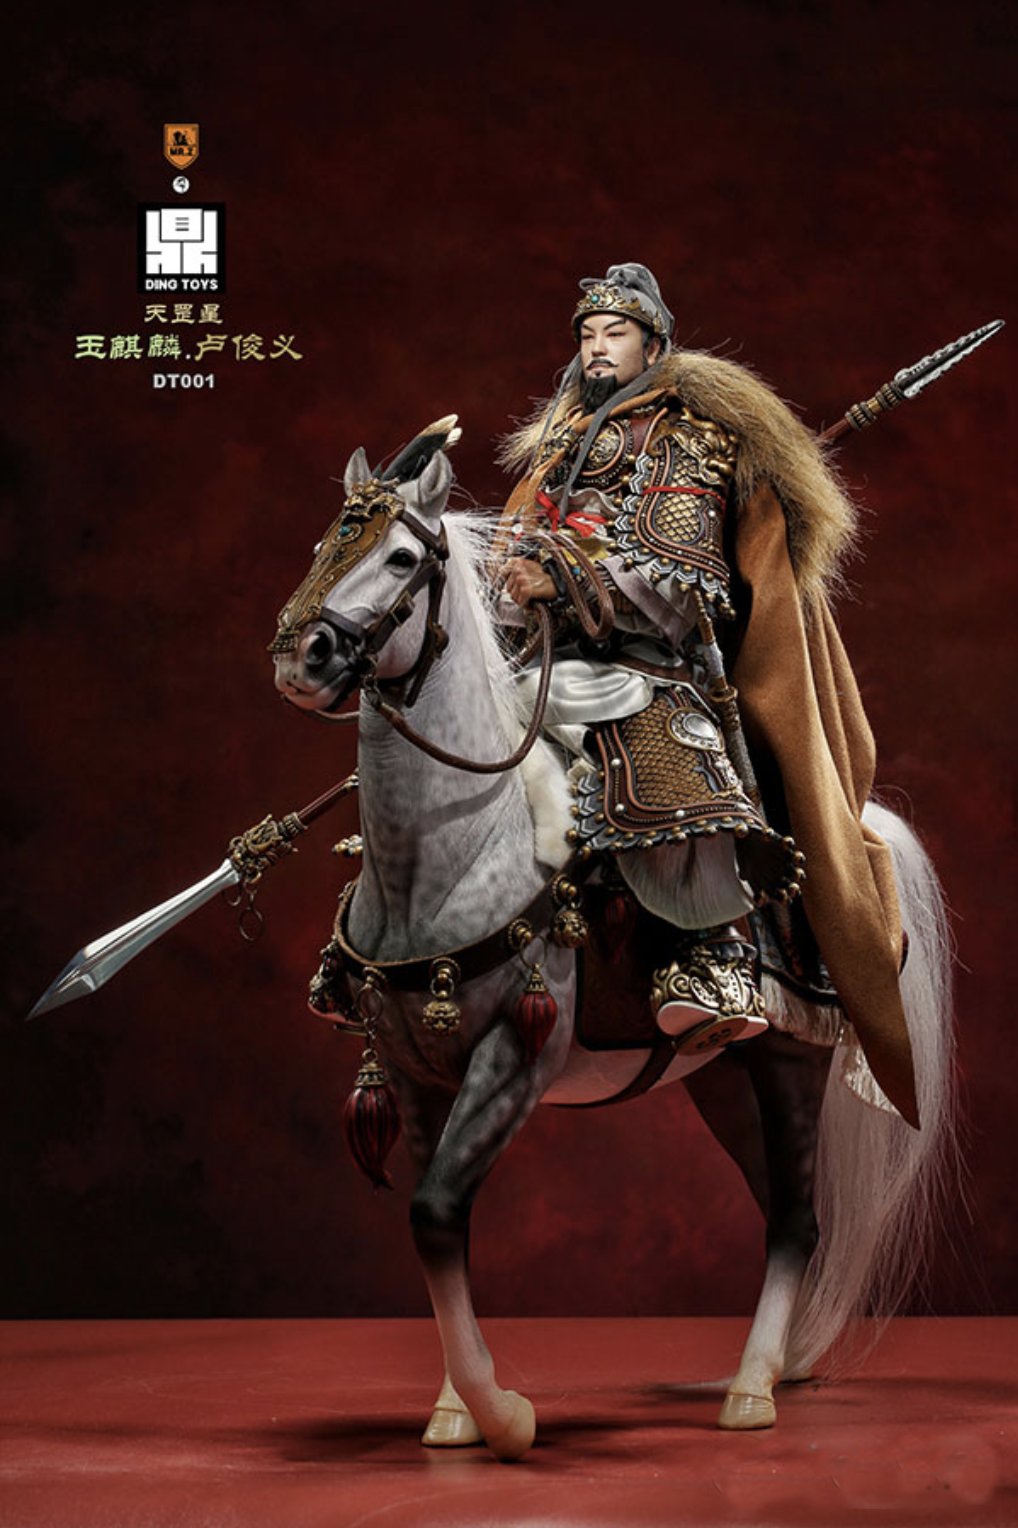 Ding Toys x Mr. Z - DT001-D - Water Margin 水滸傳 - The Jade Qilin 玉麒麟: Lu Junyi 盧俊義 (Complete Set) (1/6 Scale) - Marvelous Toys